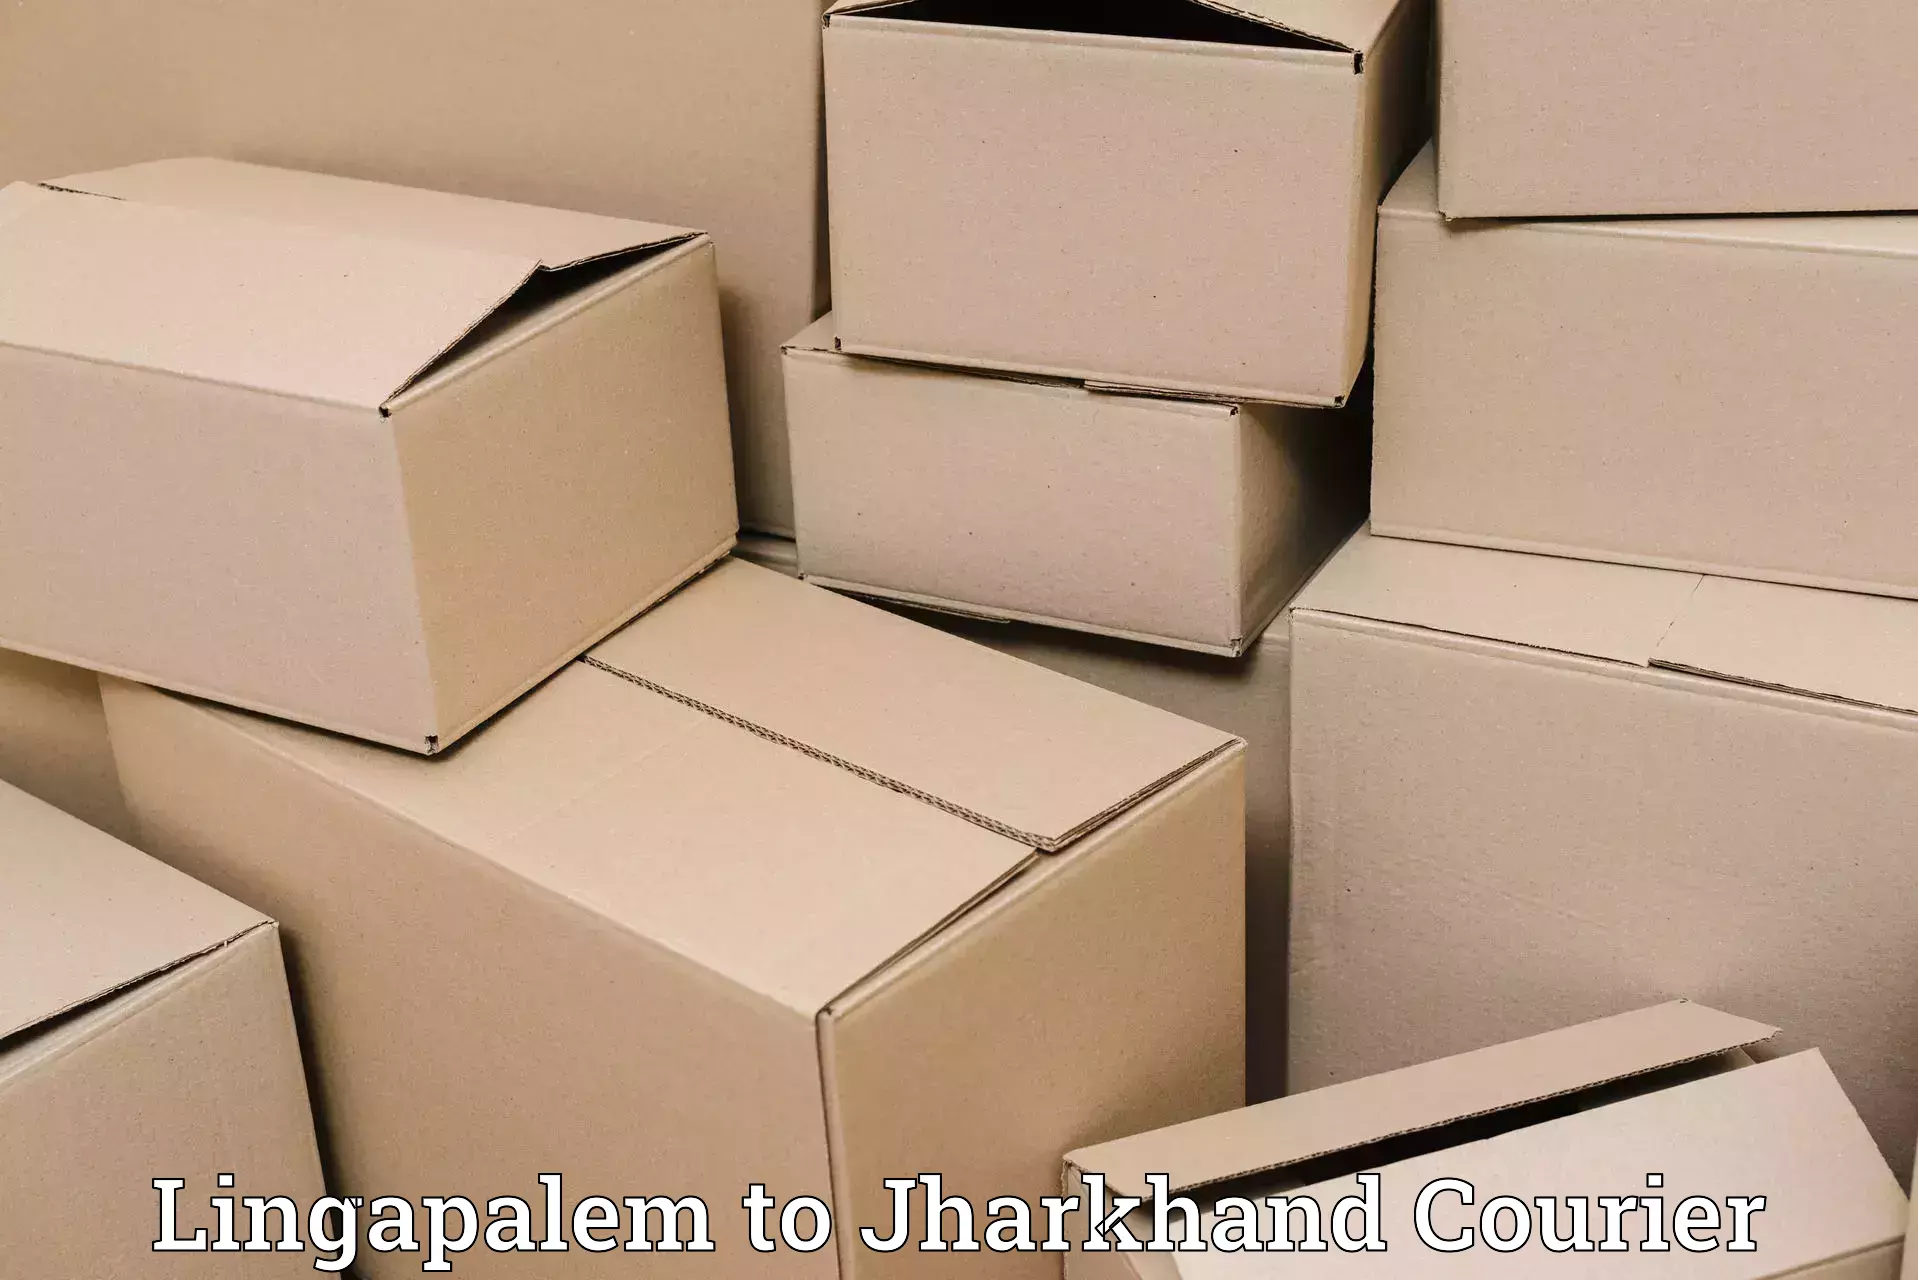 Flexible delivery schedules Lingapalem to Shikaripara